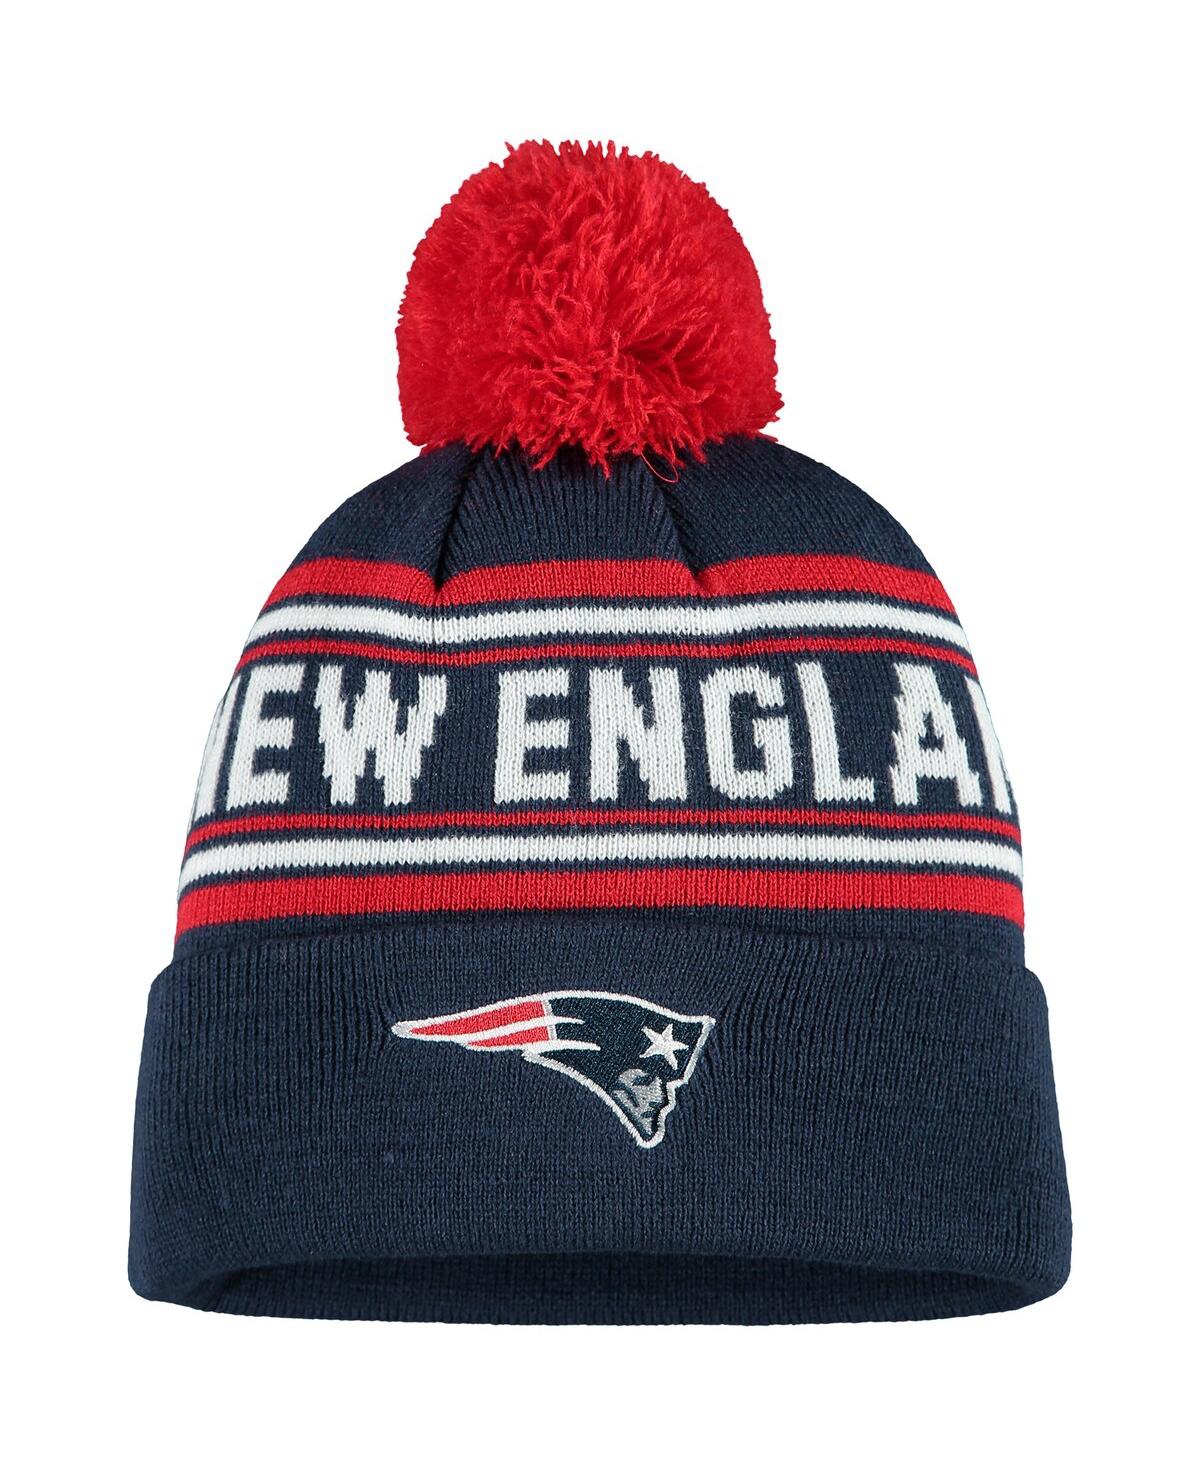 OUTERSTUFF YOUTH BOYS AND GIRLS NAVY NEW ENGLAND PATRIOTS JACQUARD CUFFED KNIT HAT WITH POM